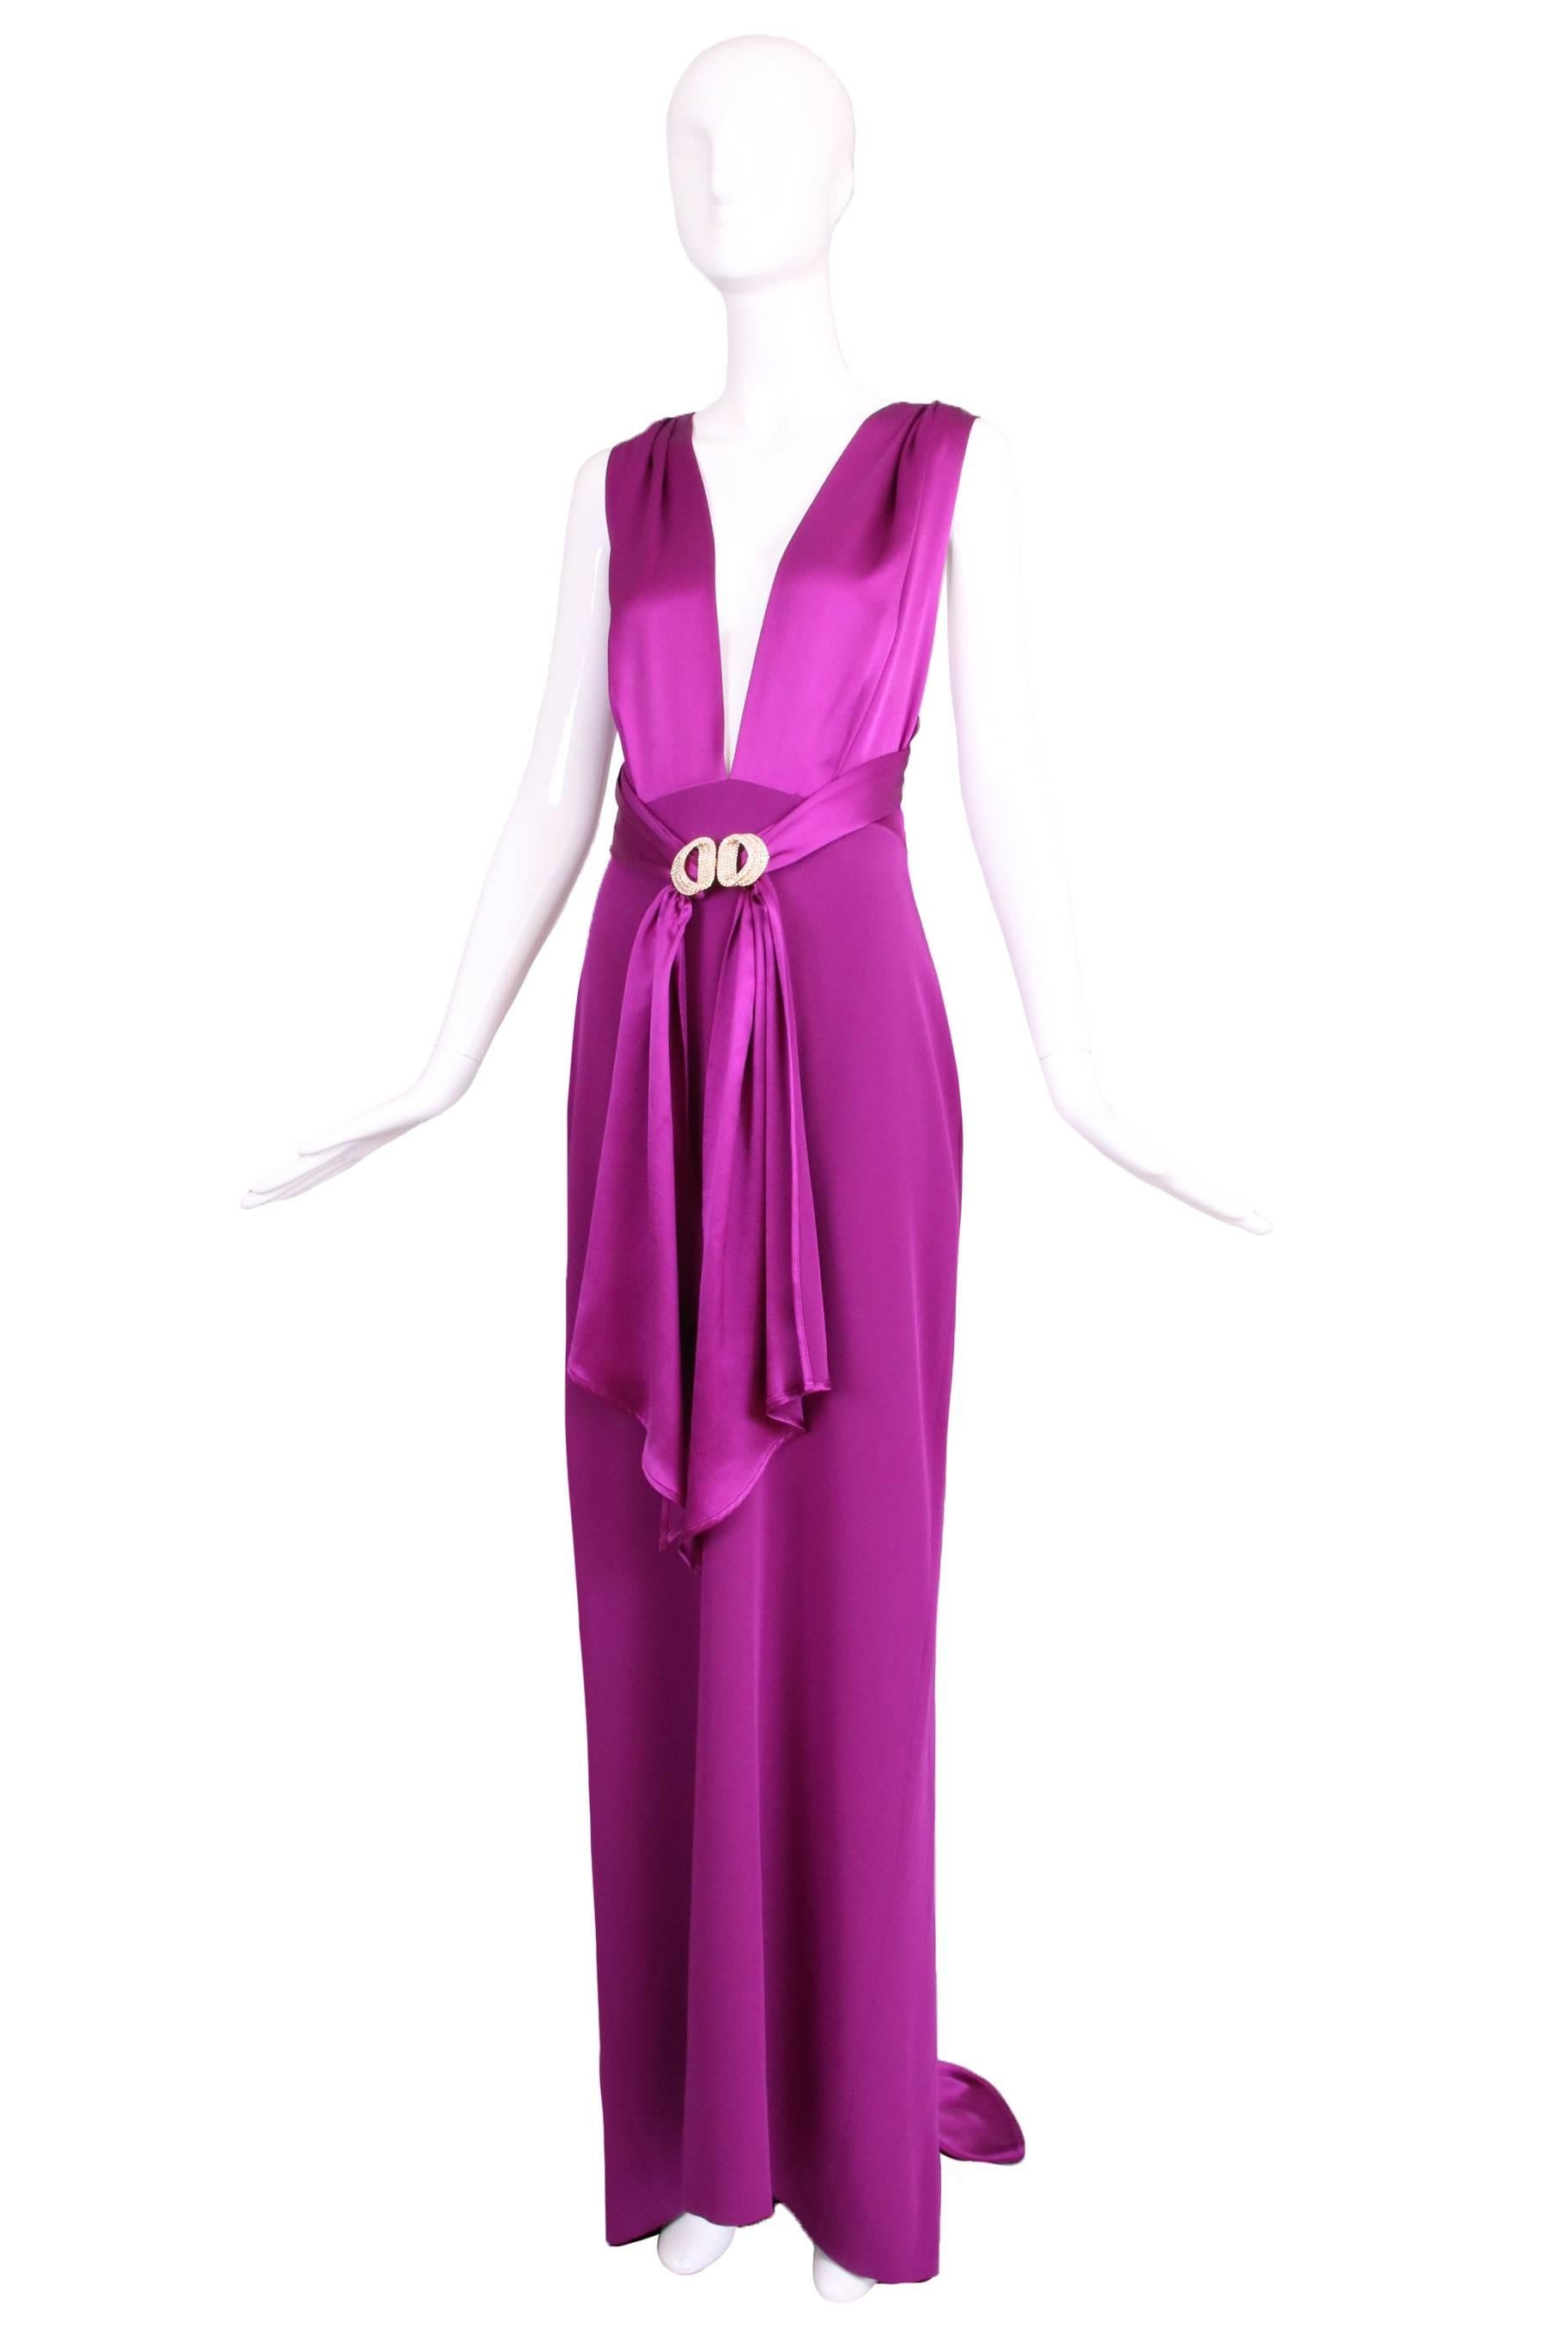 Dolce & Gabbana 100% silk fuchsia dramatic plunge neck evening gown with rhinestone buckle waist ties and silk satin mini train at the back. In excellent condition. Size tag 44.
MEASUREMENTS:
Waist - 28"
Hips - 40"